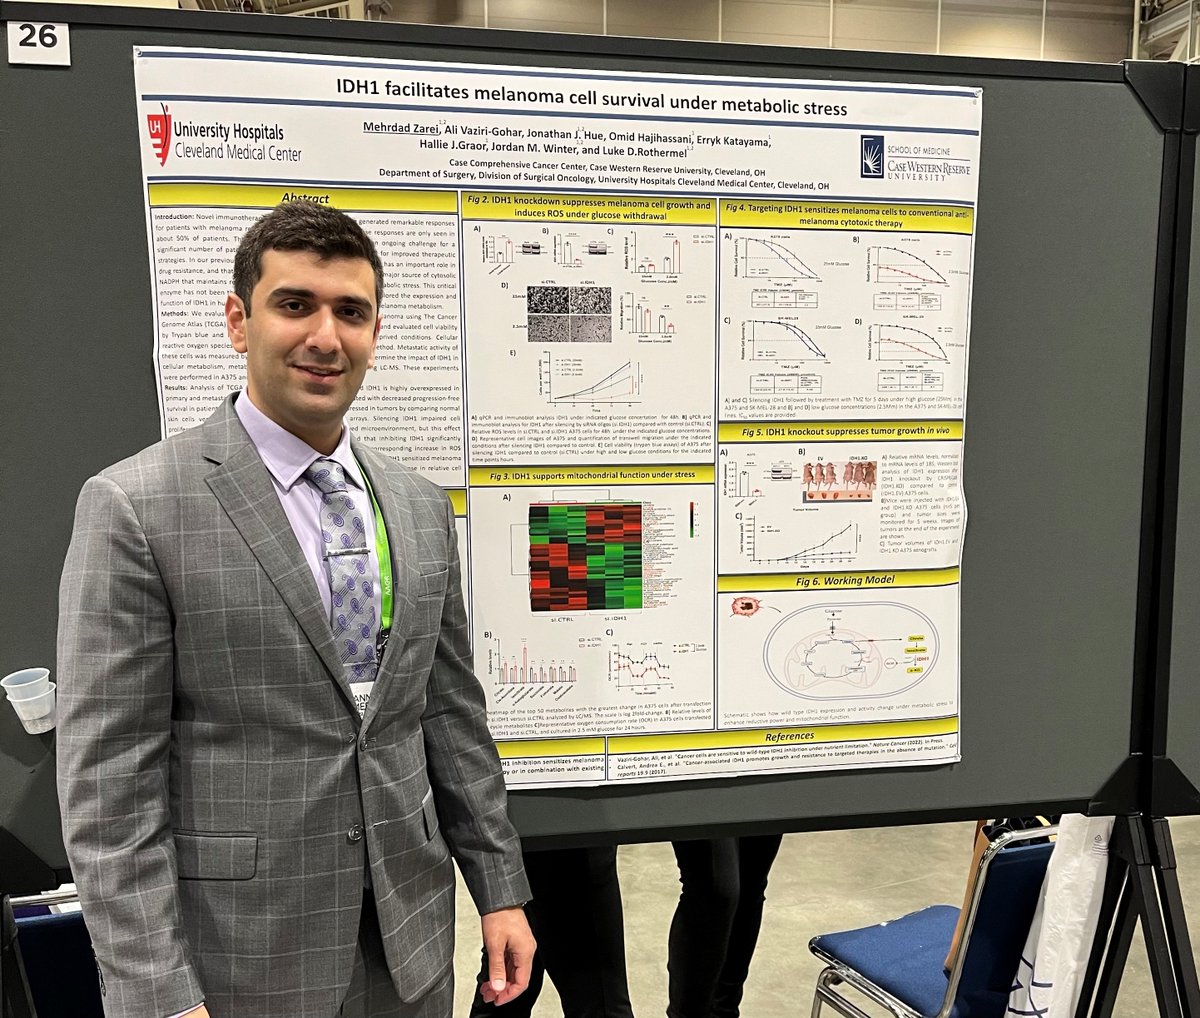 I am grateful for attending #AACR2022 this year and having the opportunity to present our research and connect in person with professionals in cancer research. Thanks to my great PIs @JordanMWinterMD, @LukeRothermel, and members of our team @omidhhassani, @errykkatayama, @jj_hue